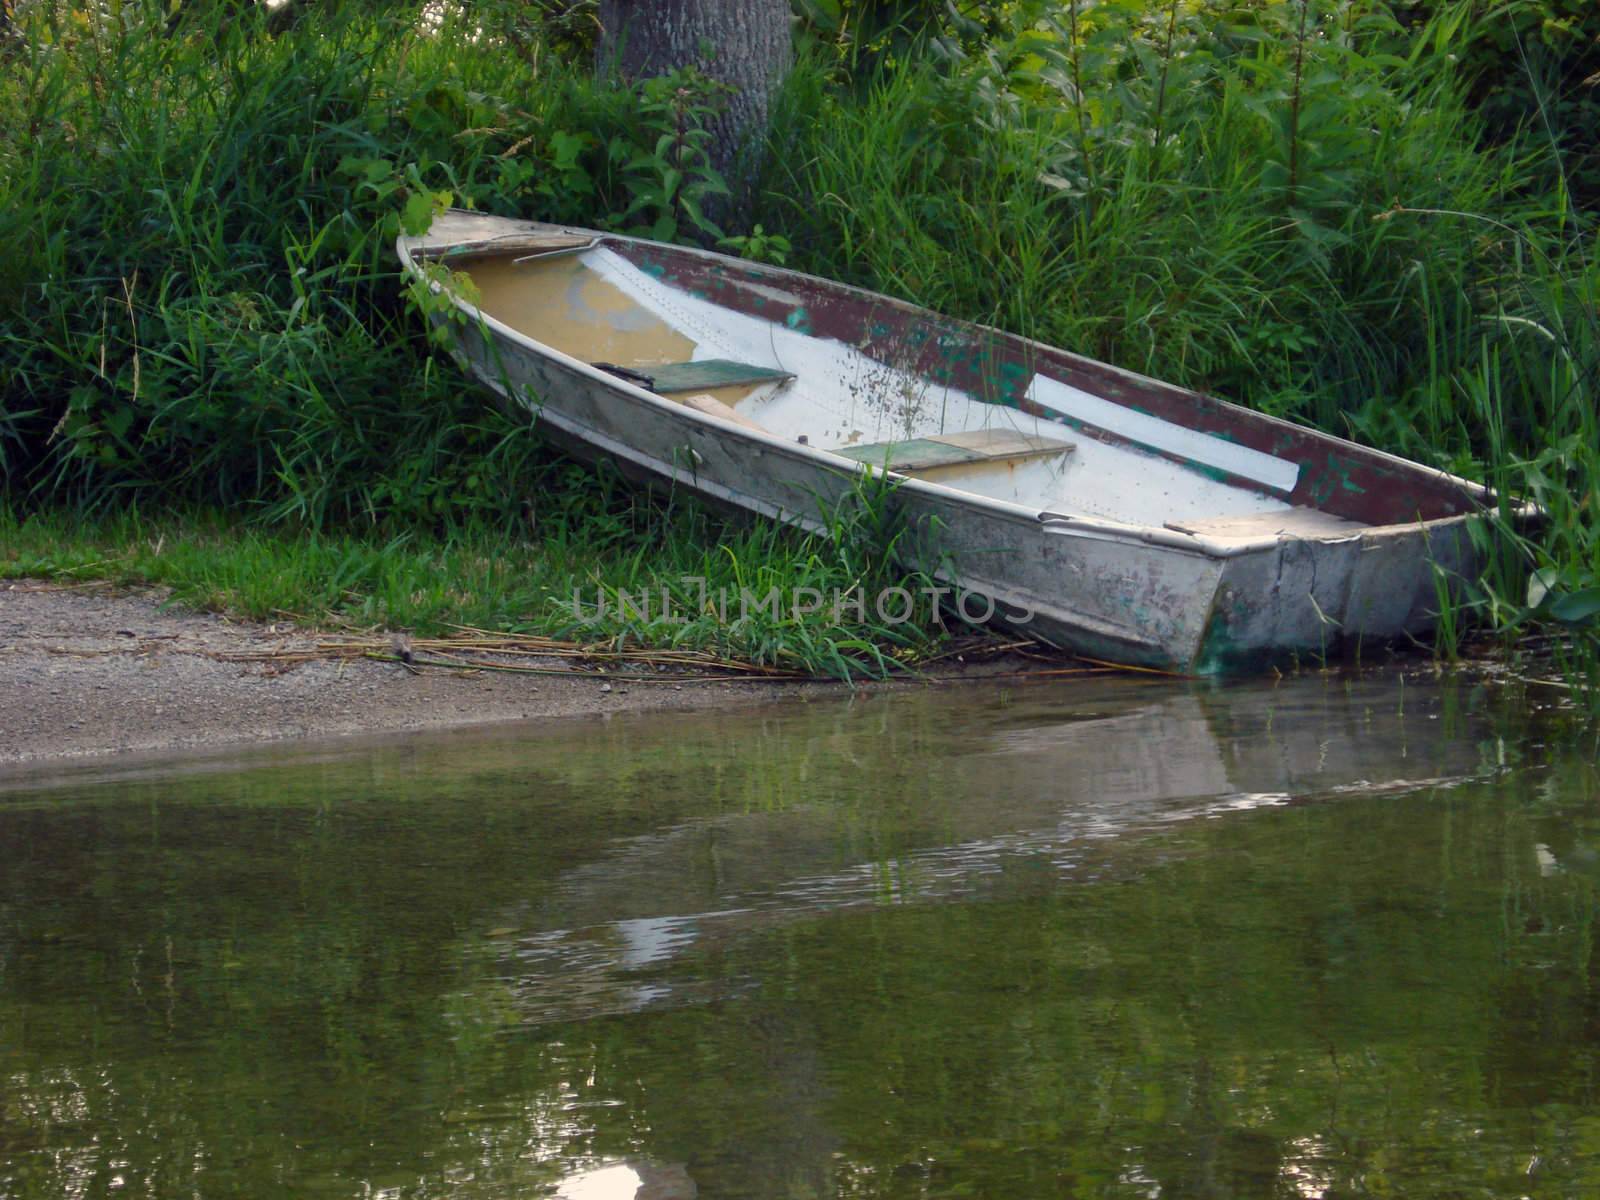 An old boat sits on the shore of a secluded launch.